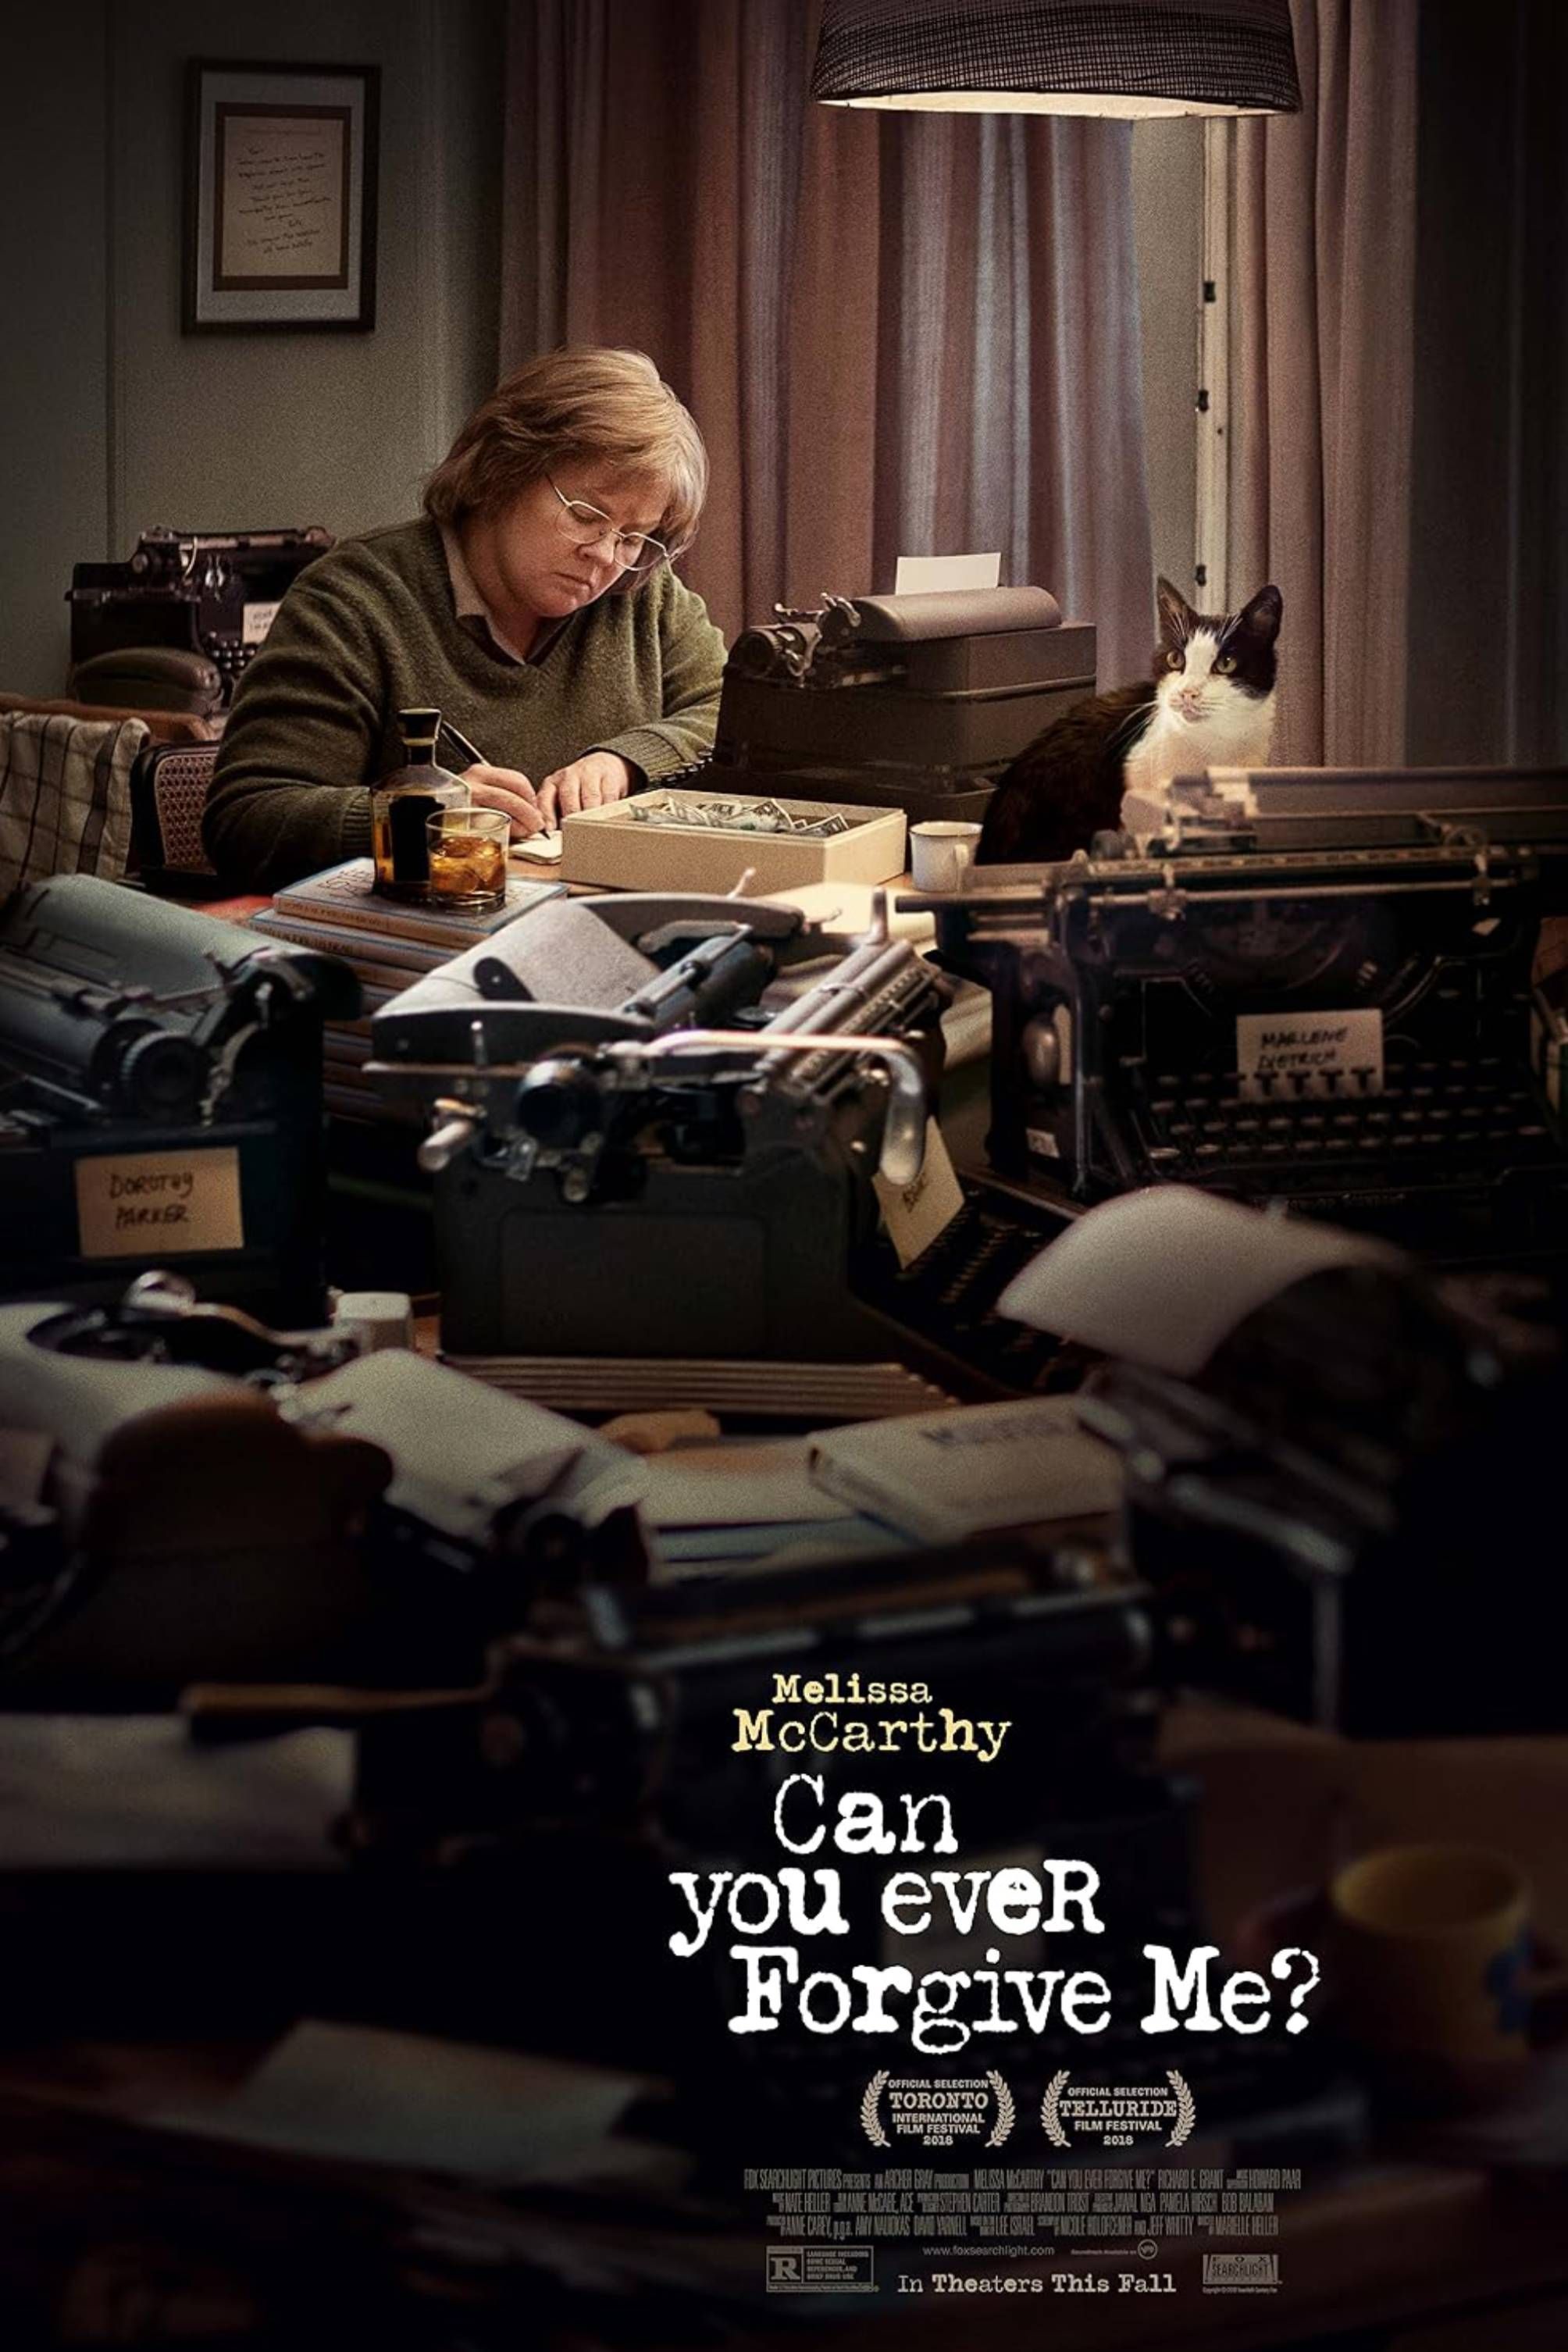 can-you-ever-forgive-me_-2018-poster-melissa-mccarthy.jpg